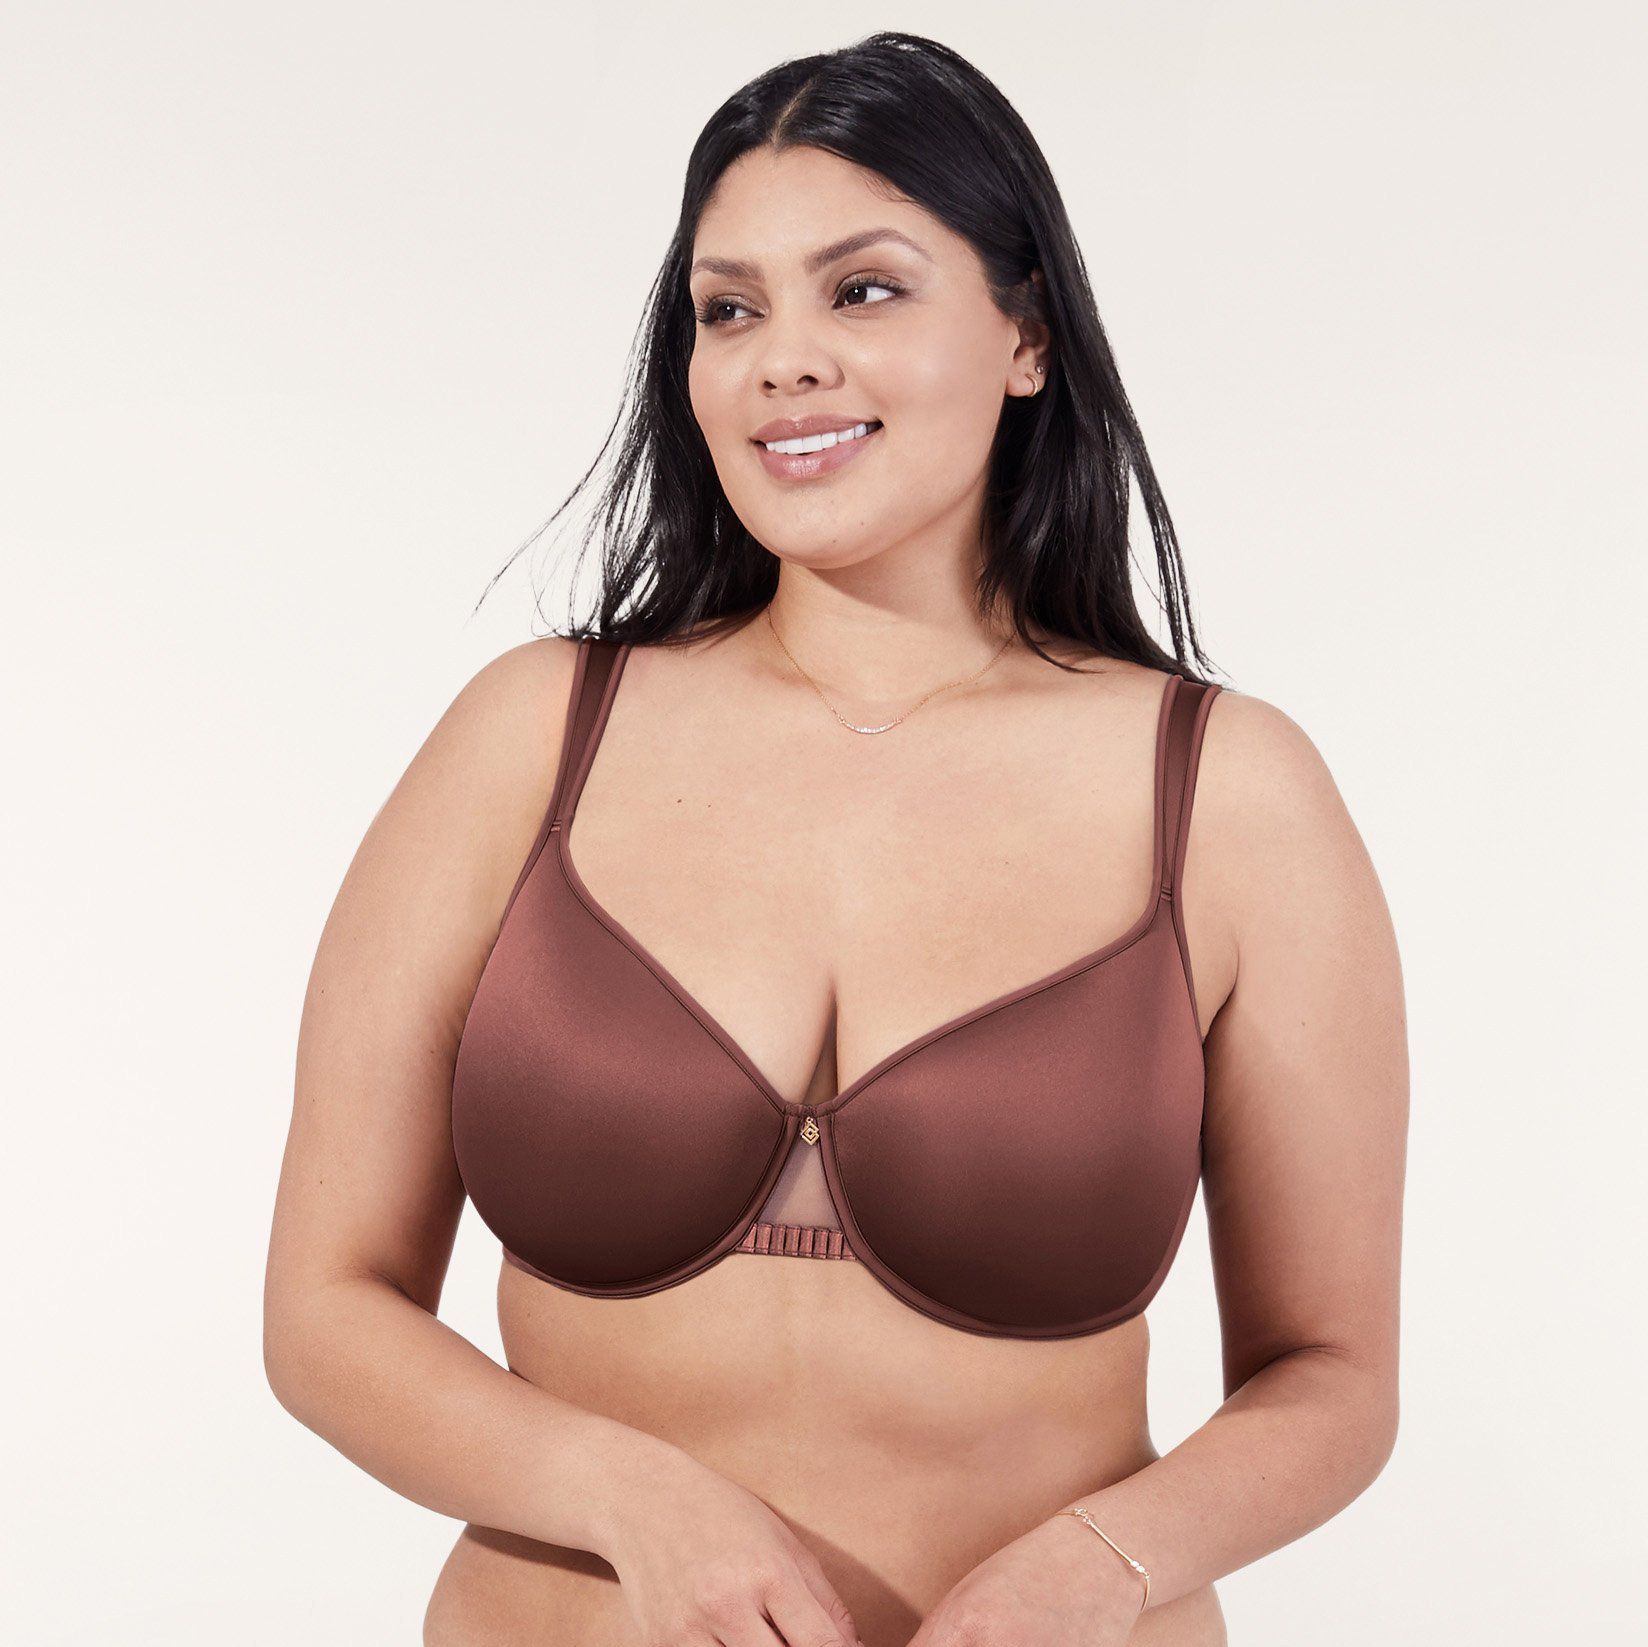 The 15 Best Bras for Big Boobs - Top-Rated Bras for Large Breasts